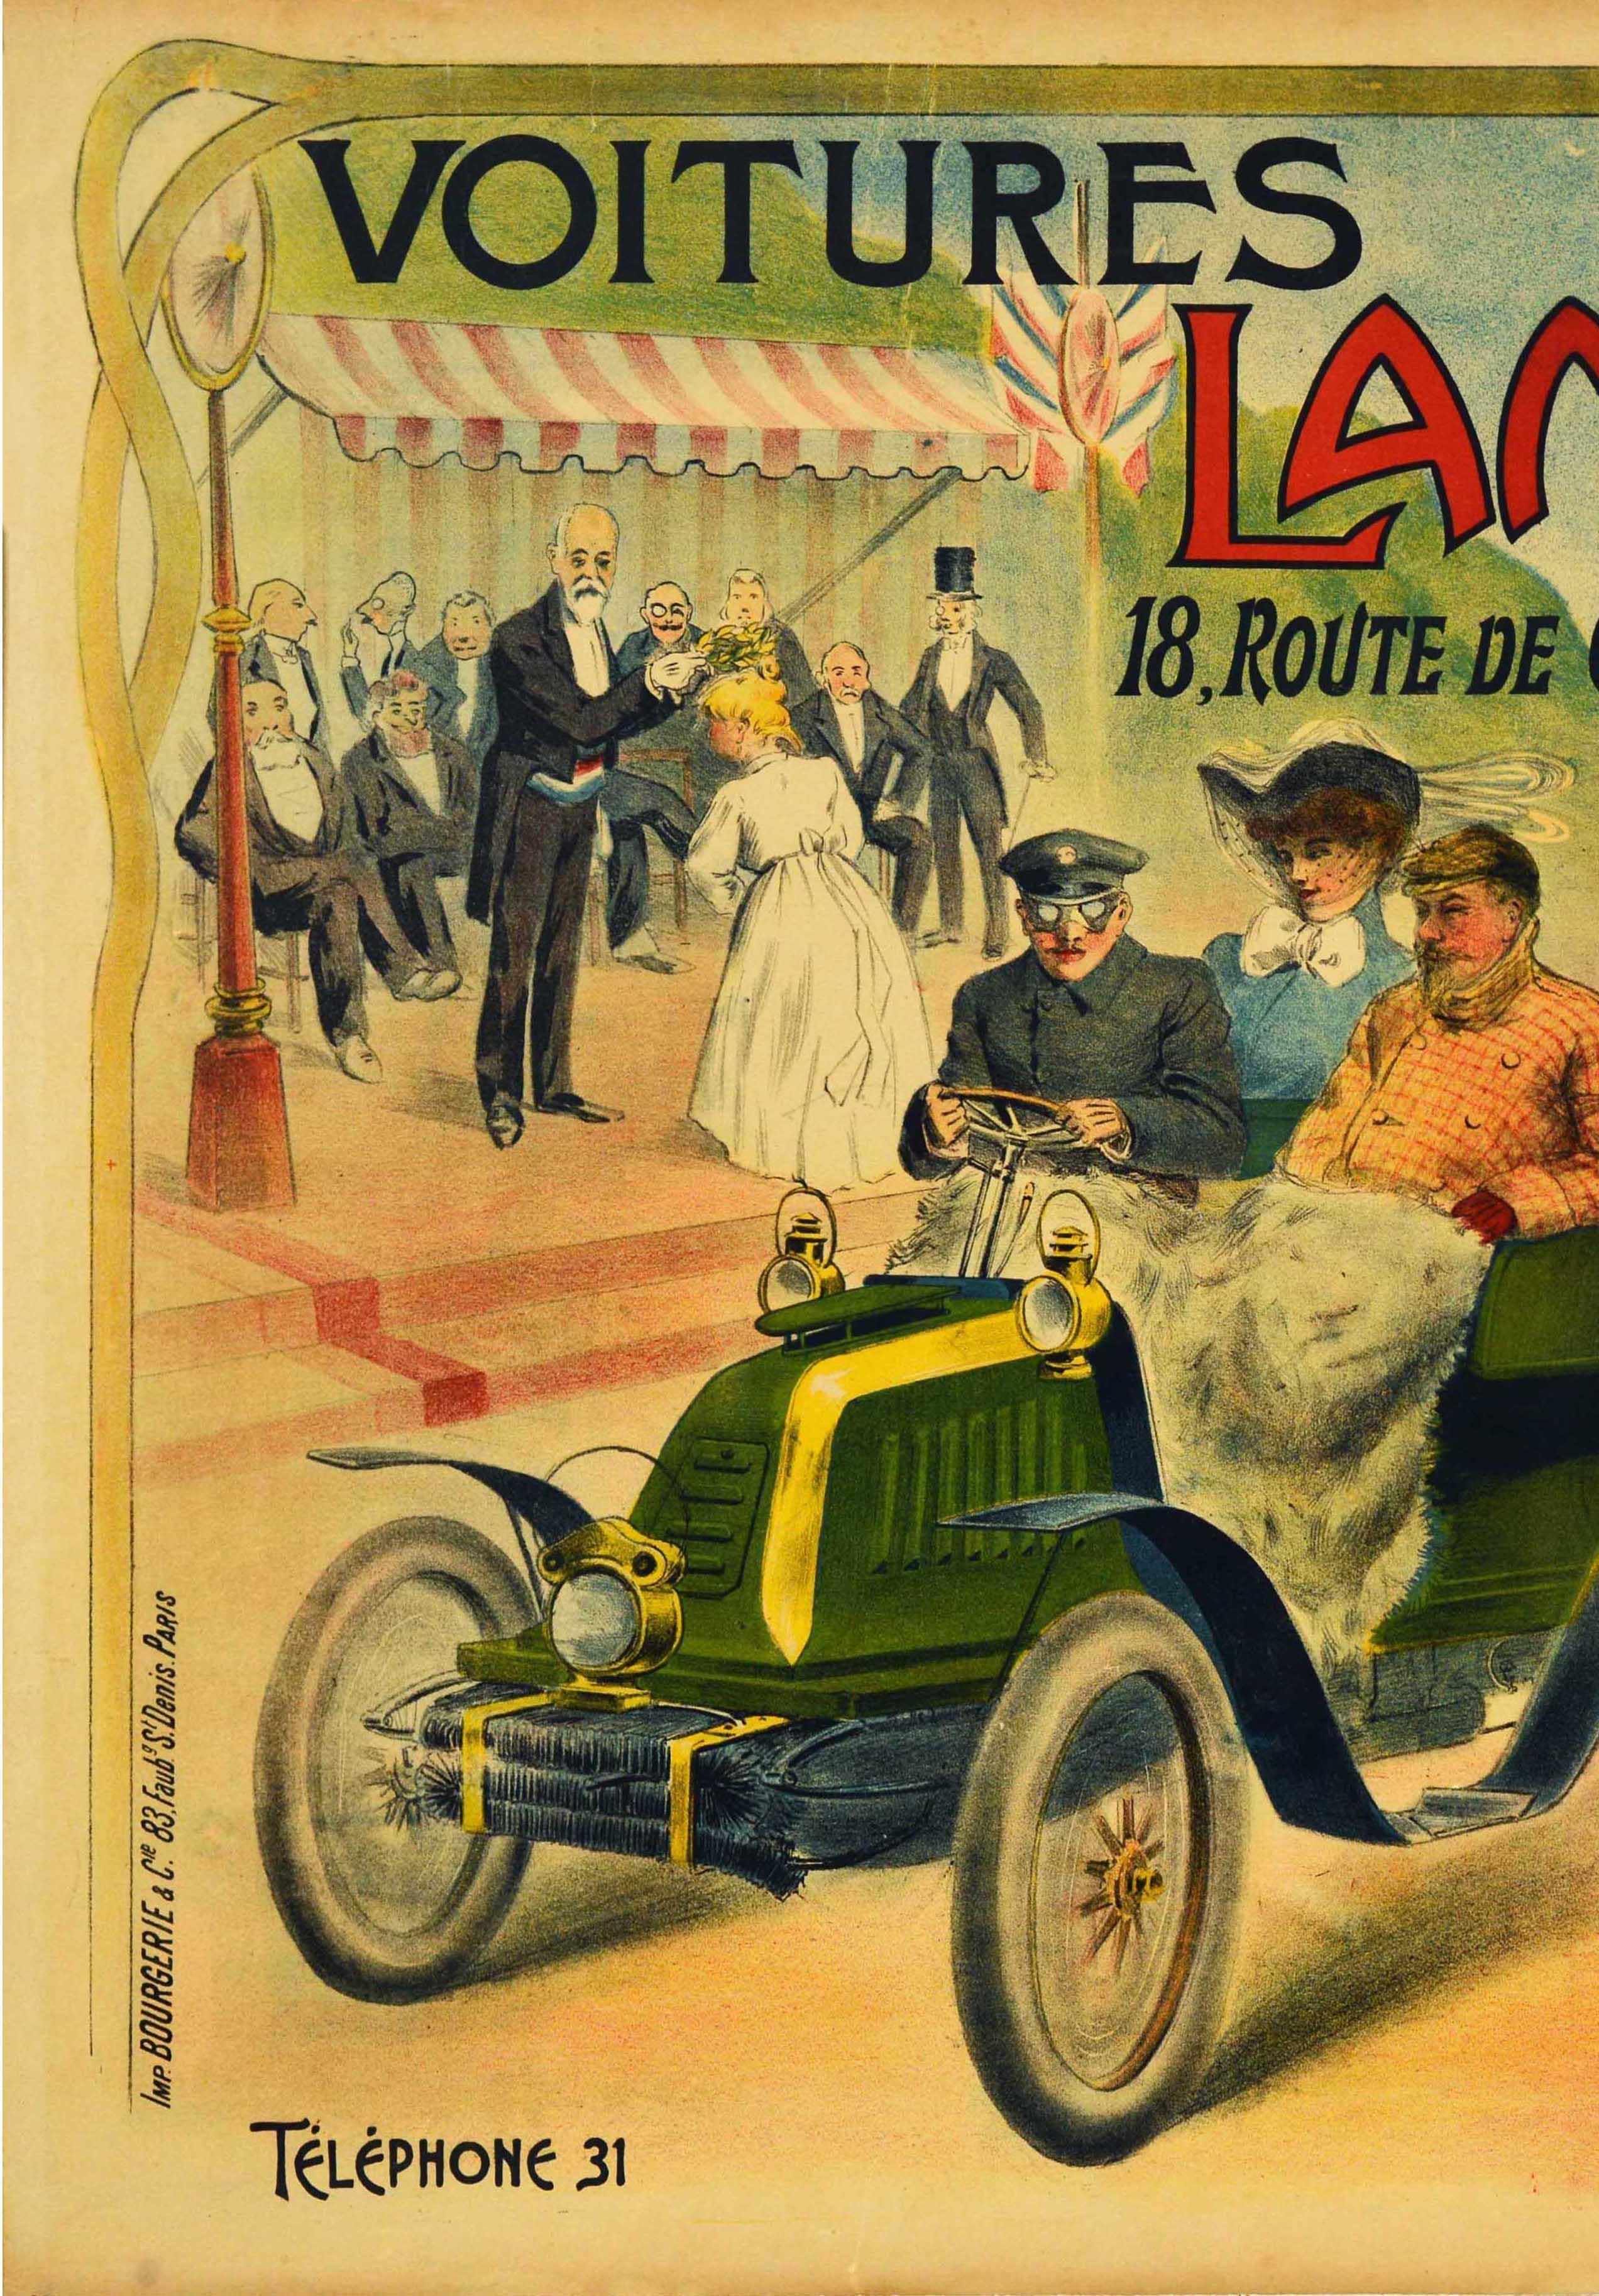 Original antique lithograph advertising poster for a French car manufacturer Prosper Lambert (1901-1906) featuring a great image showing smartly dressed people in a Classic car driving past a military band playing music and holding a French flag